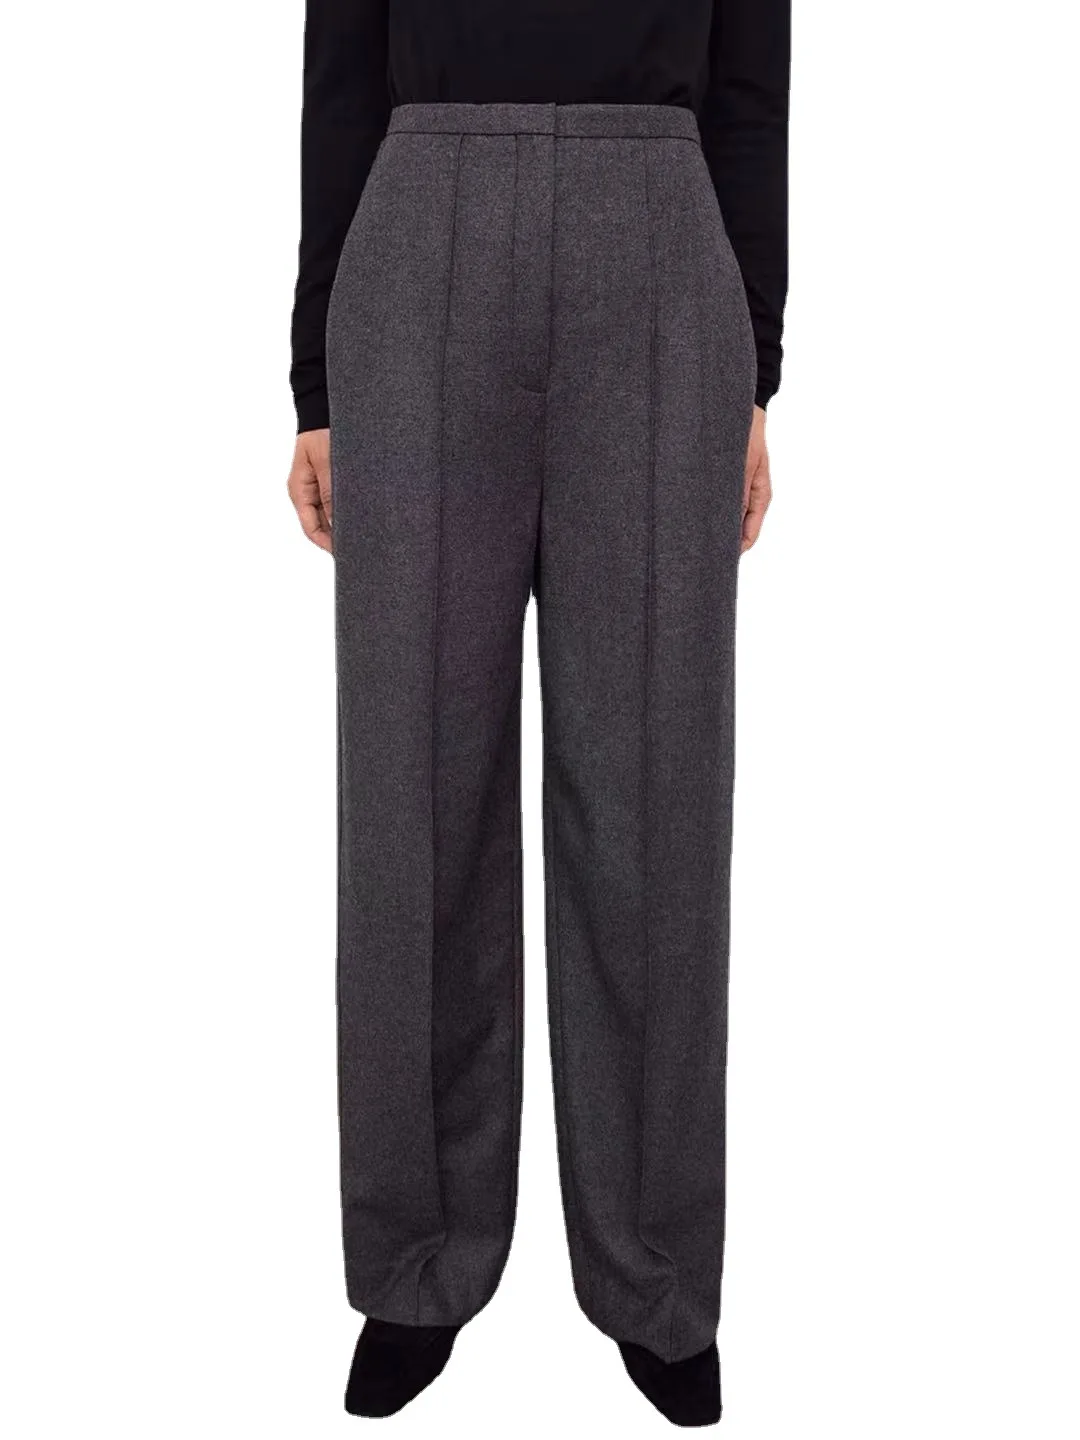 Wool Blend Stretch High-waist Casual Pants 2021 Autumn and Winter New Straight Wide-leg Pants Suit Pants